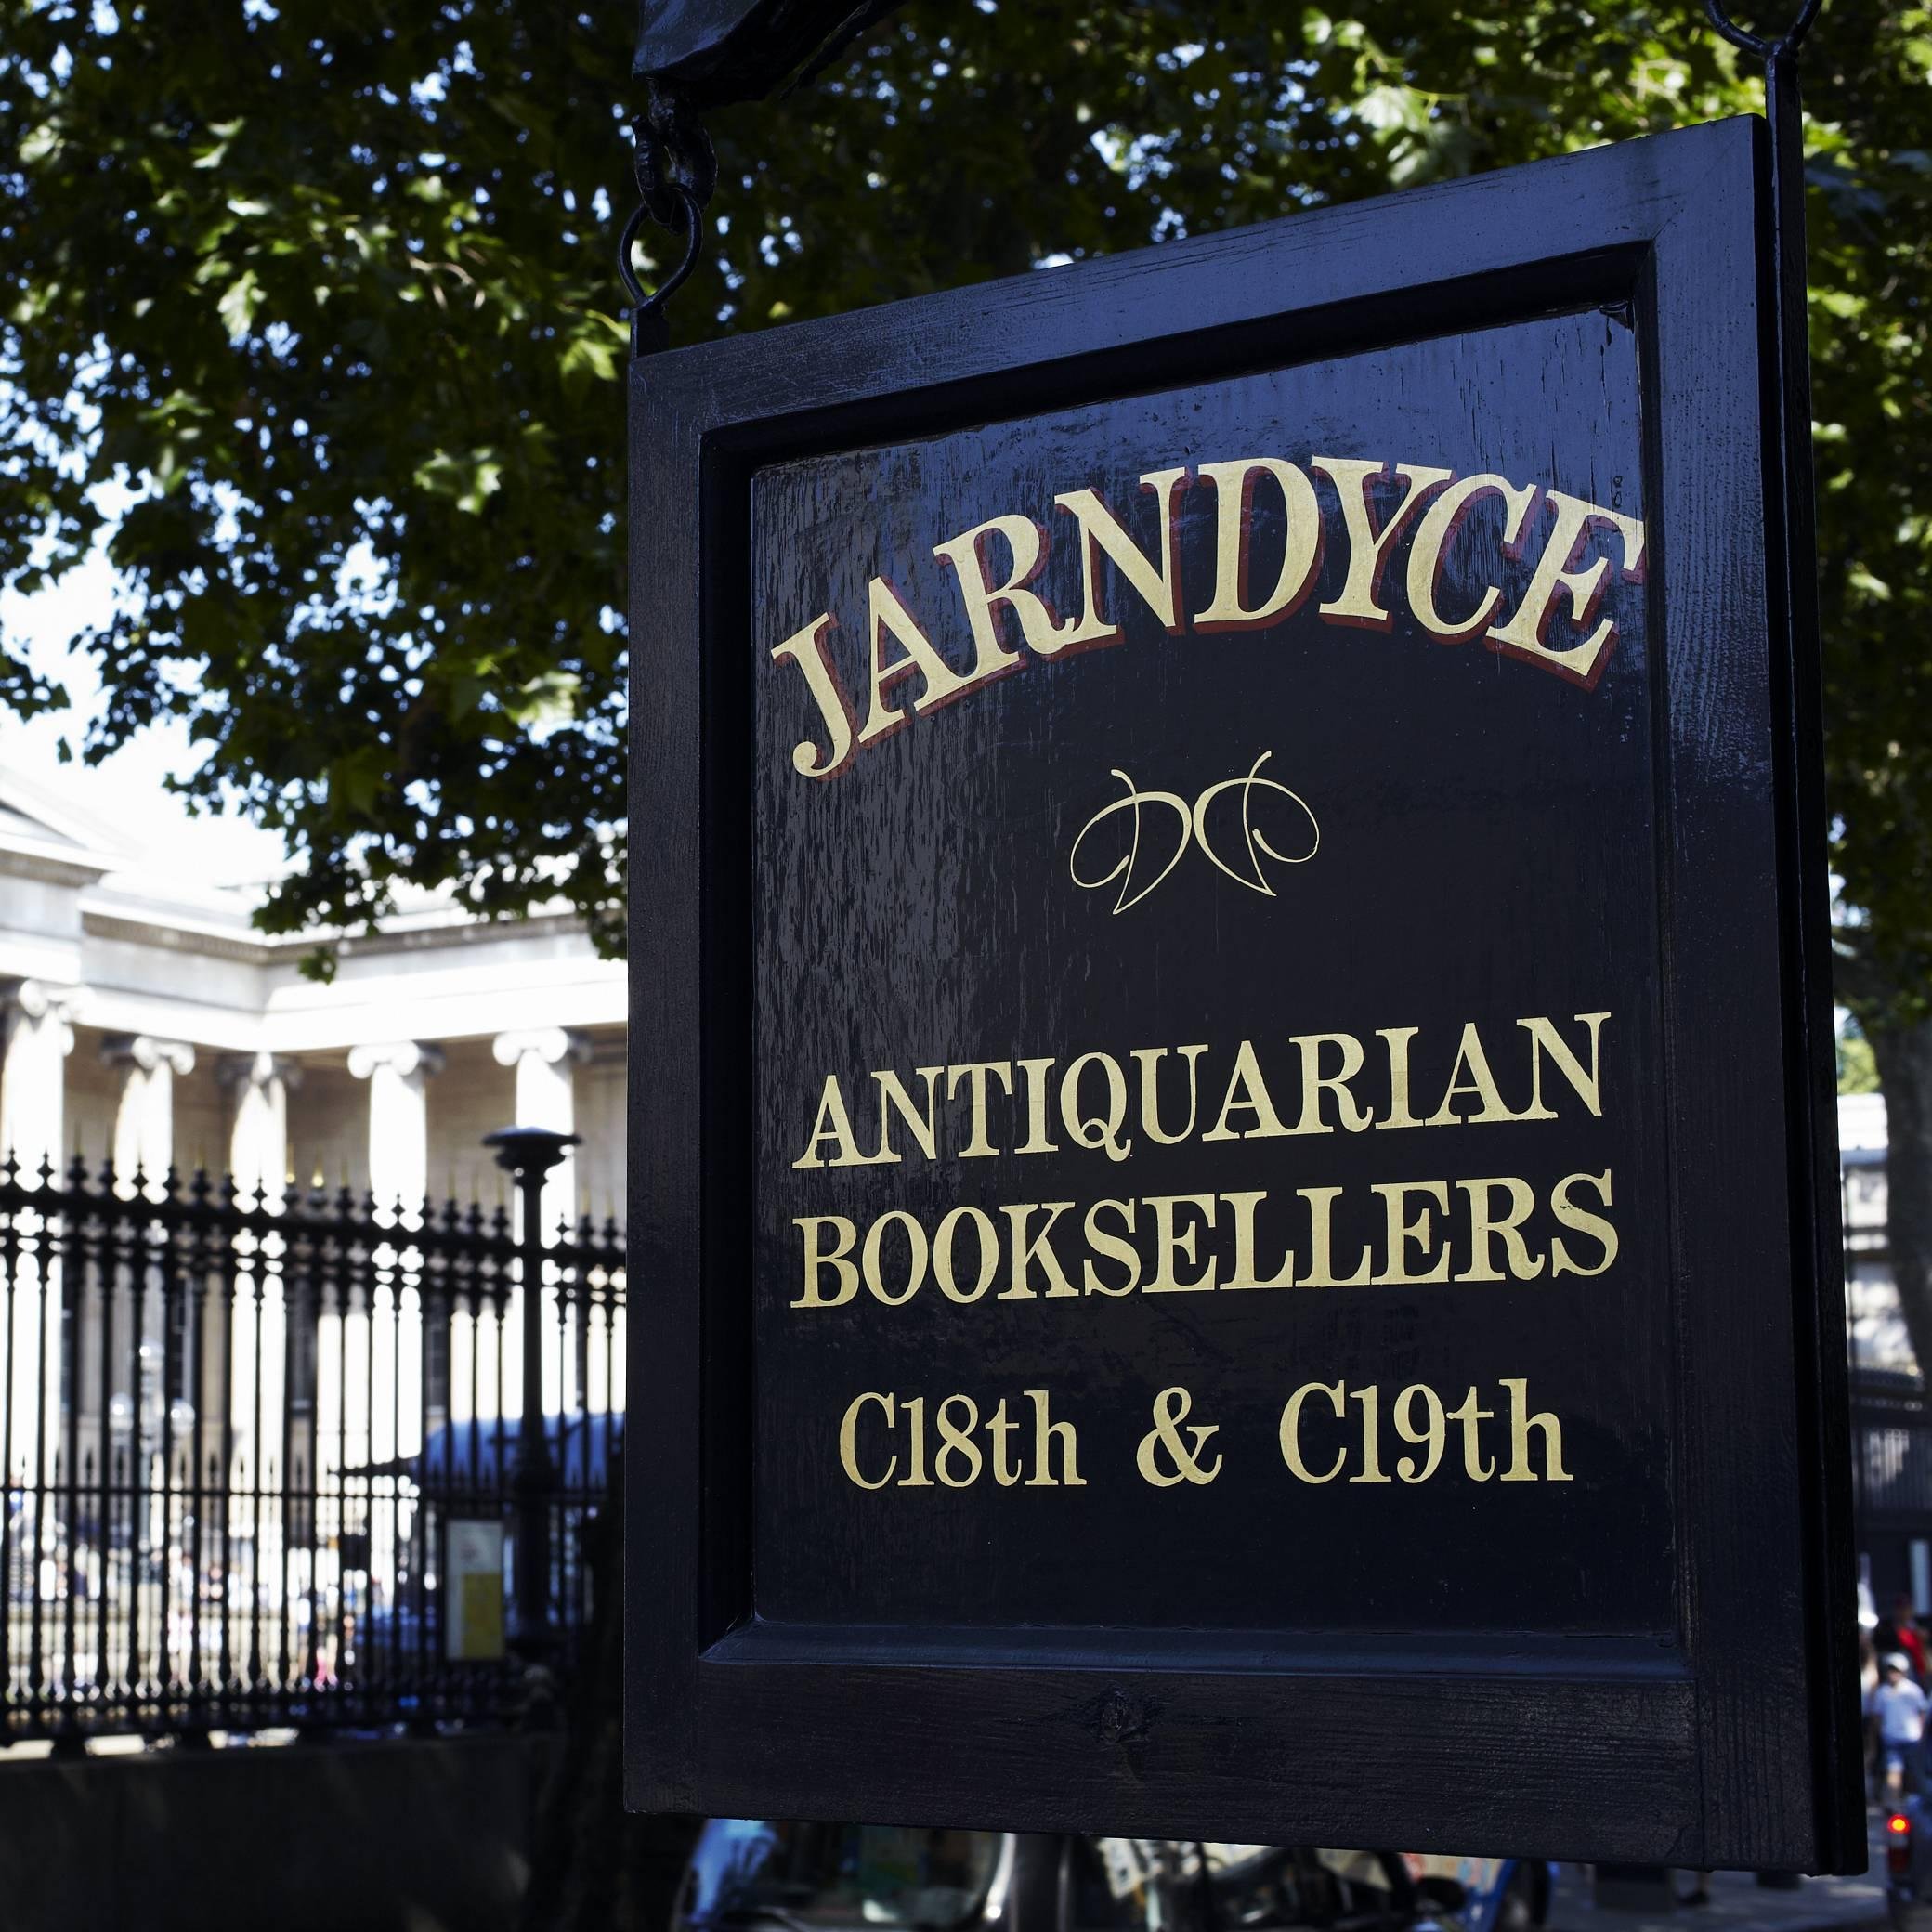 Leading specialists in 18th and, particularly, 19th century English Literature & History. Our shop, opposite the British Museum, is open between 11 & 5.30.